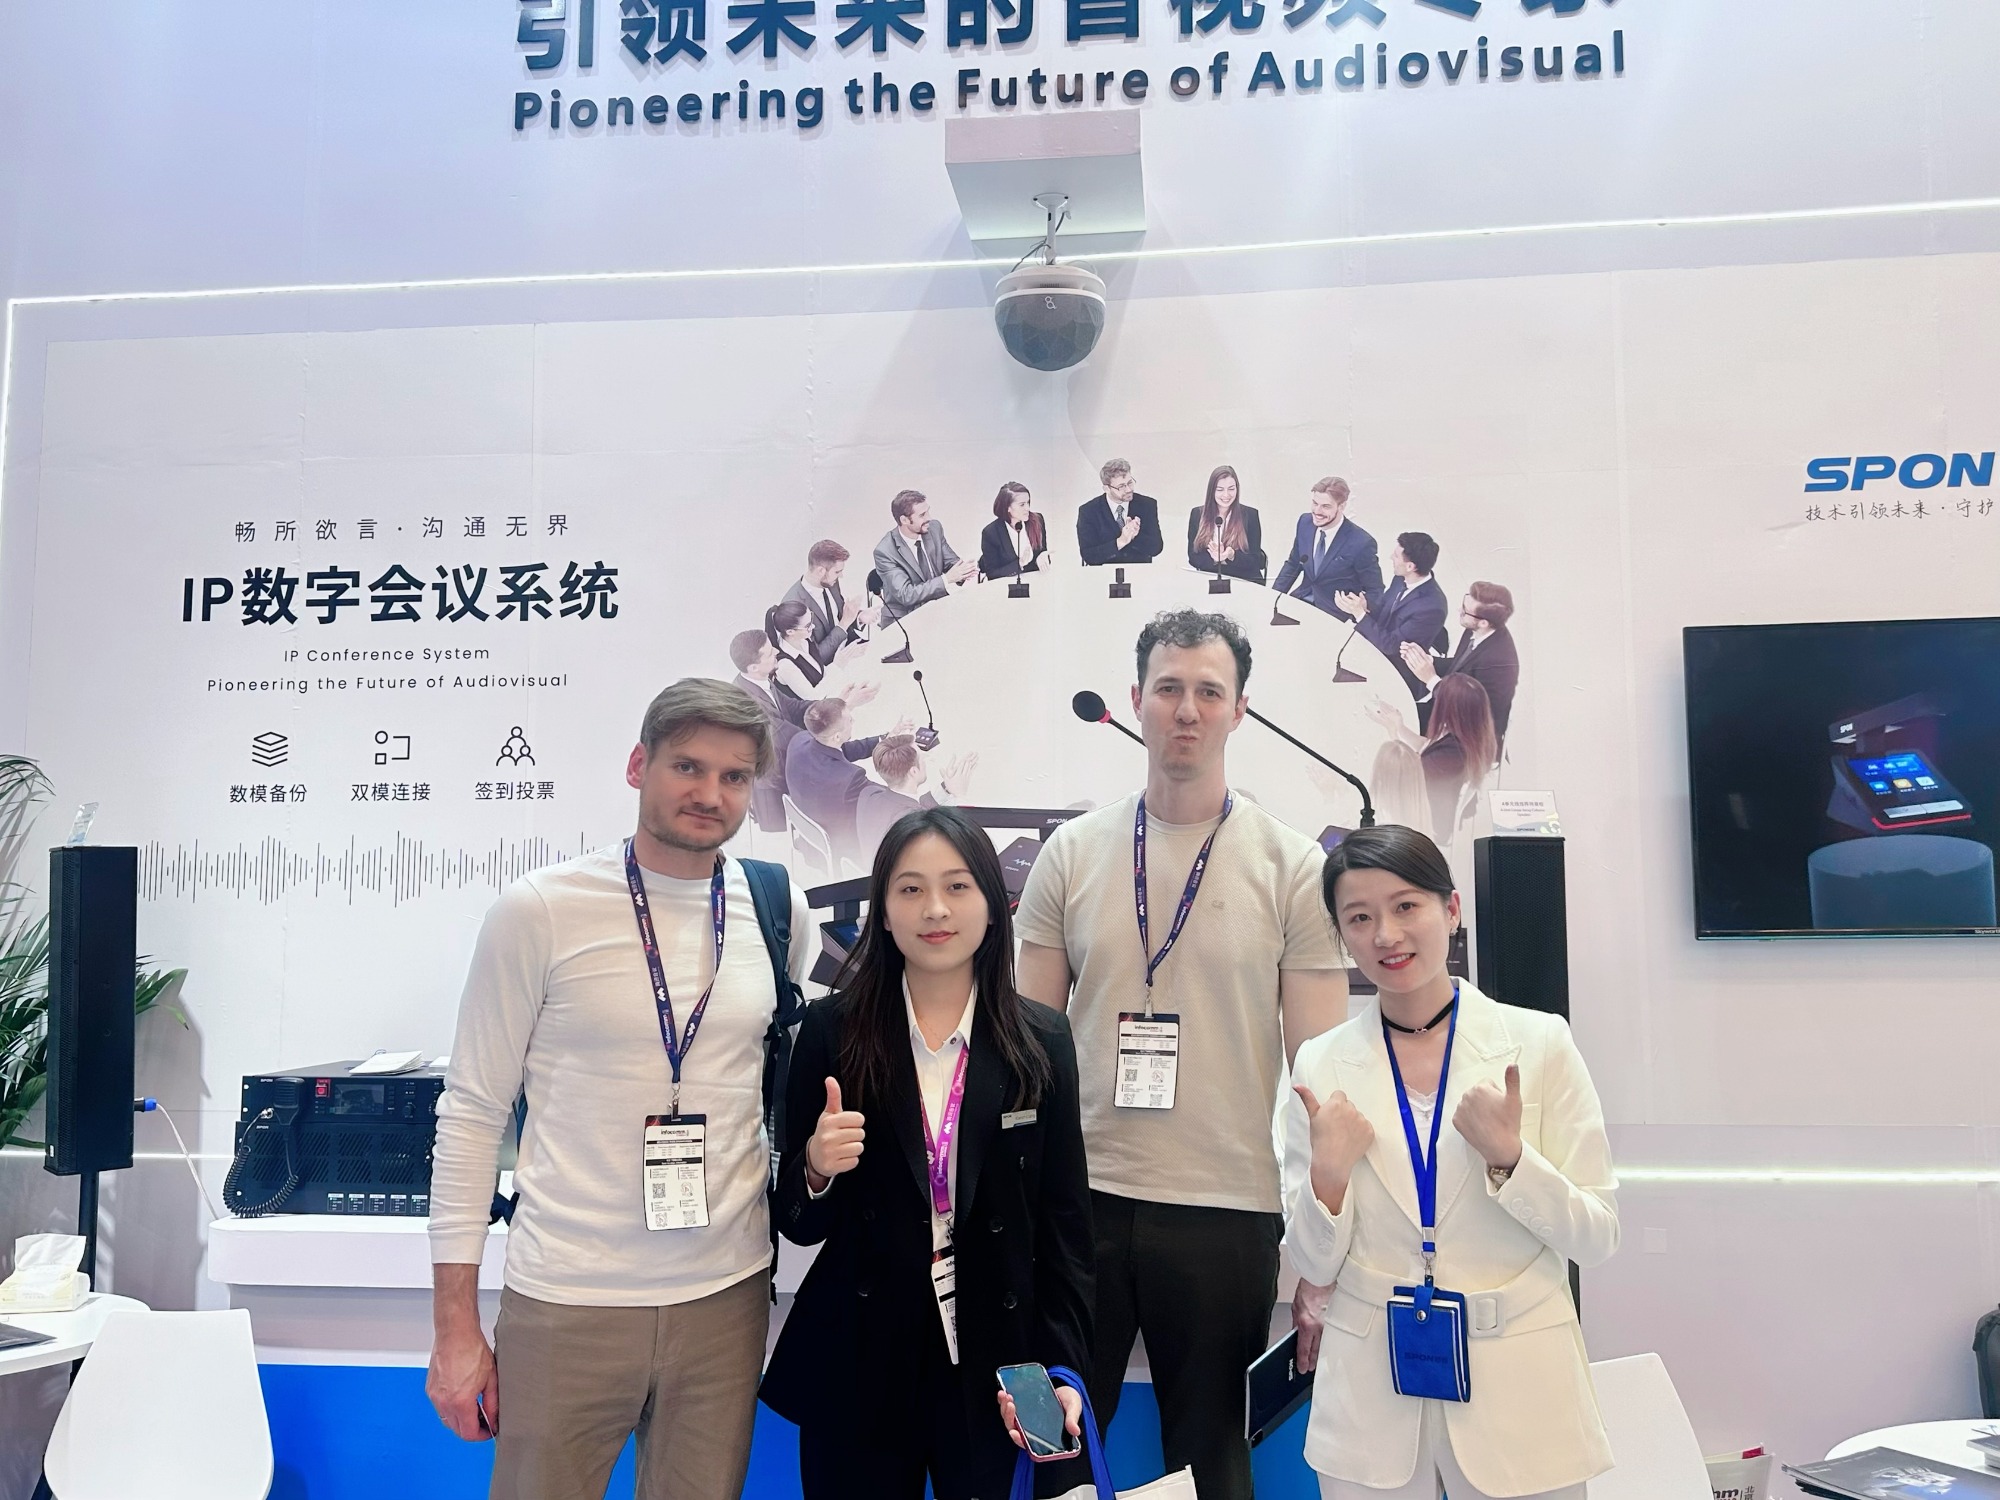 Beijing Infocomm Exhibition Concludes: A Glimpse into SPON's Innovative Offerings